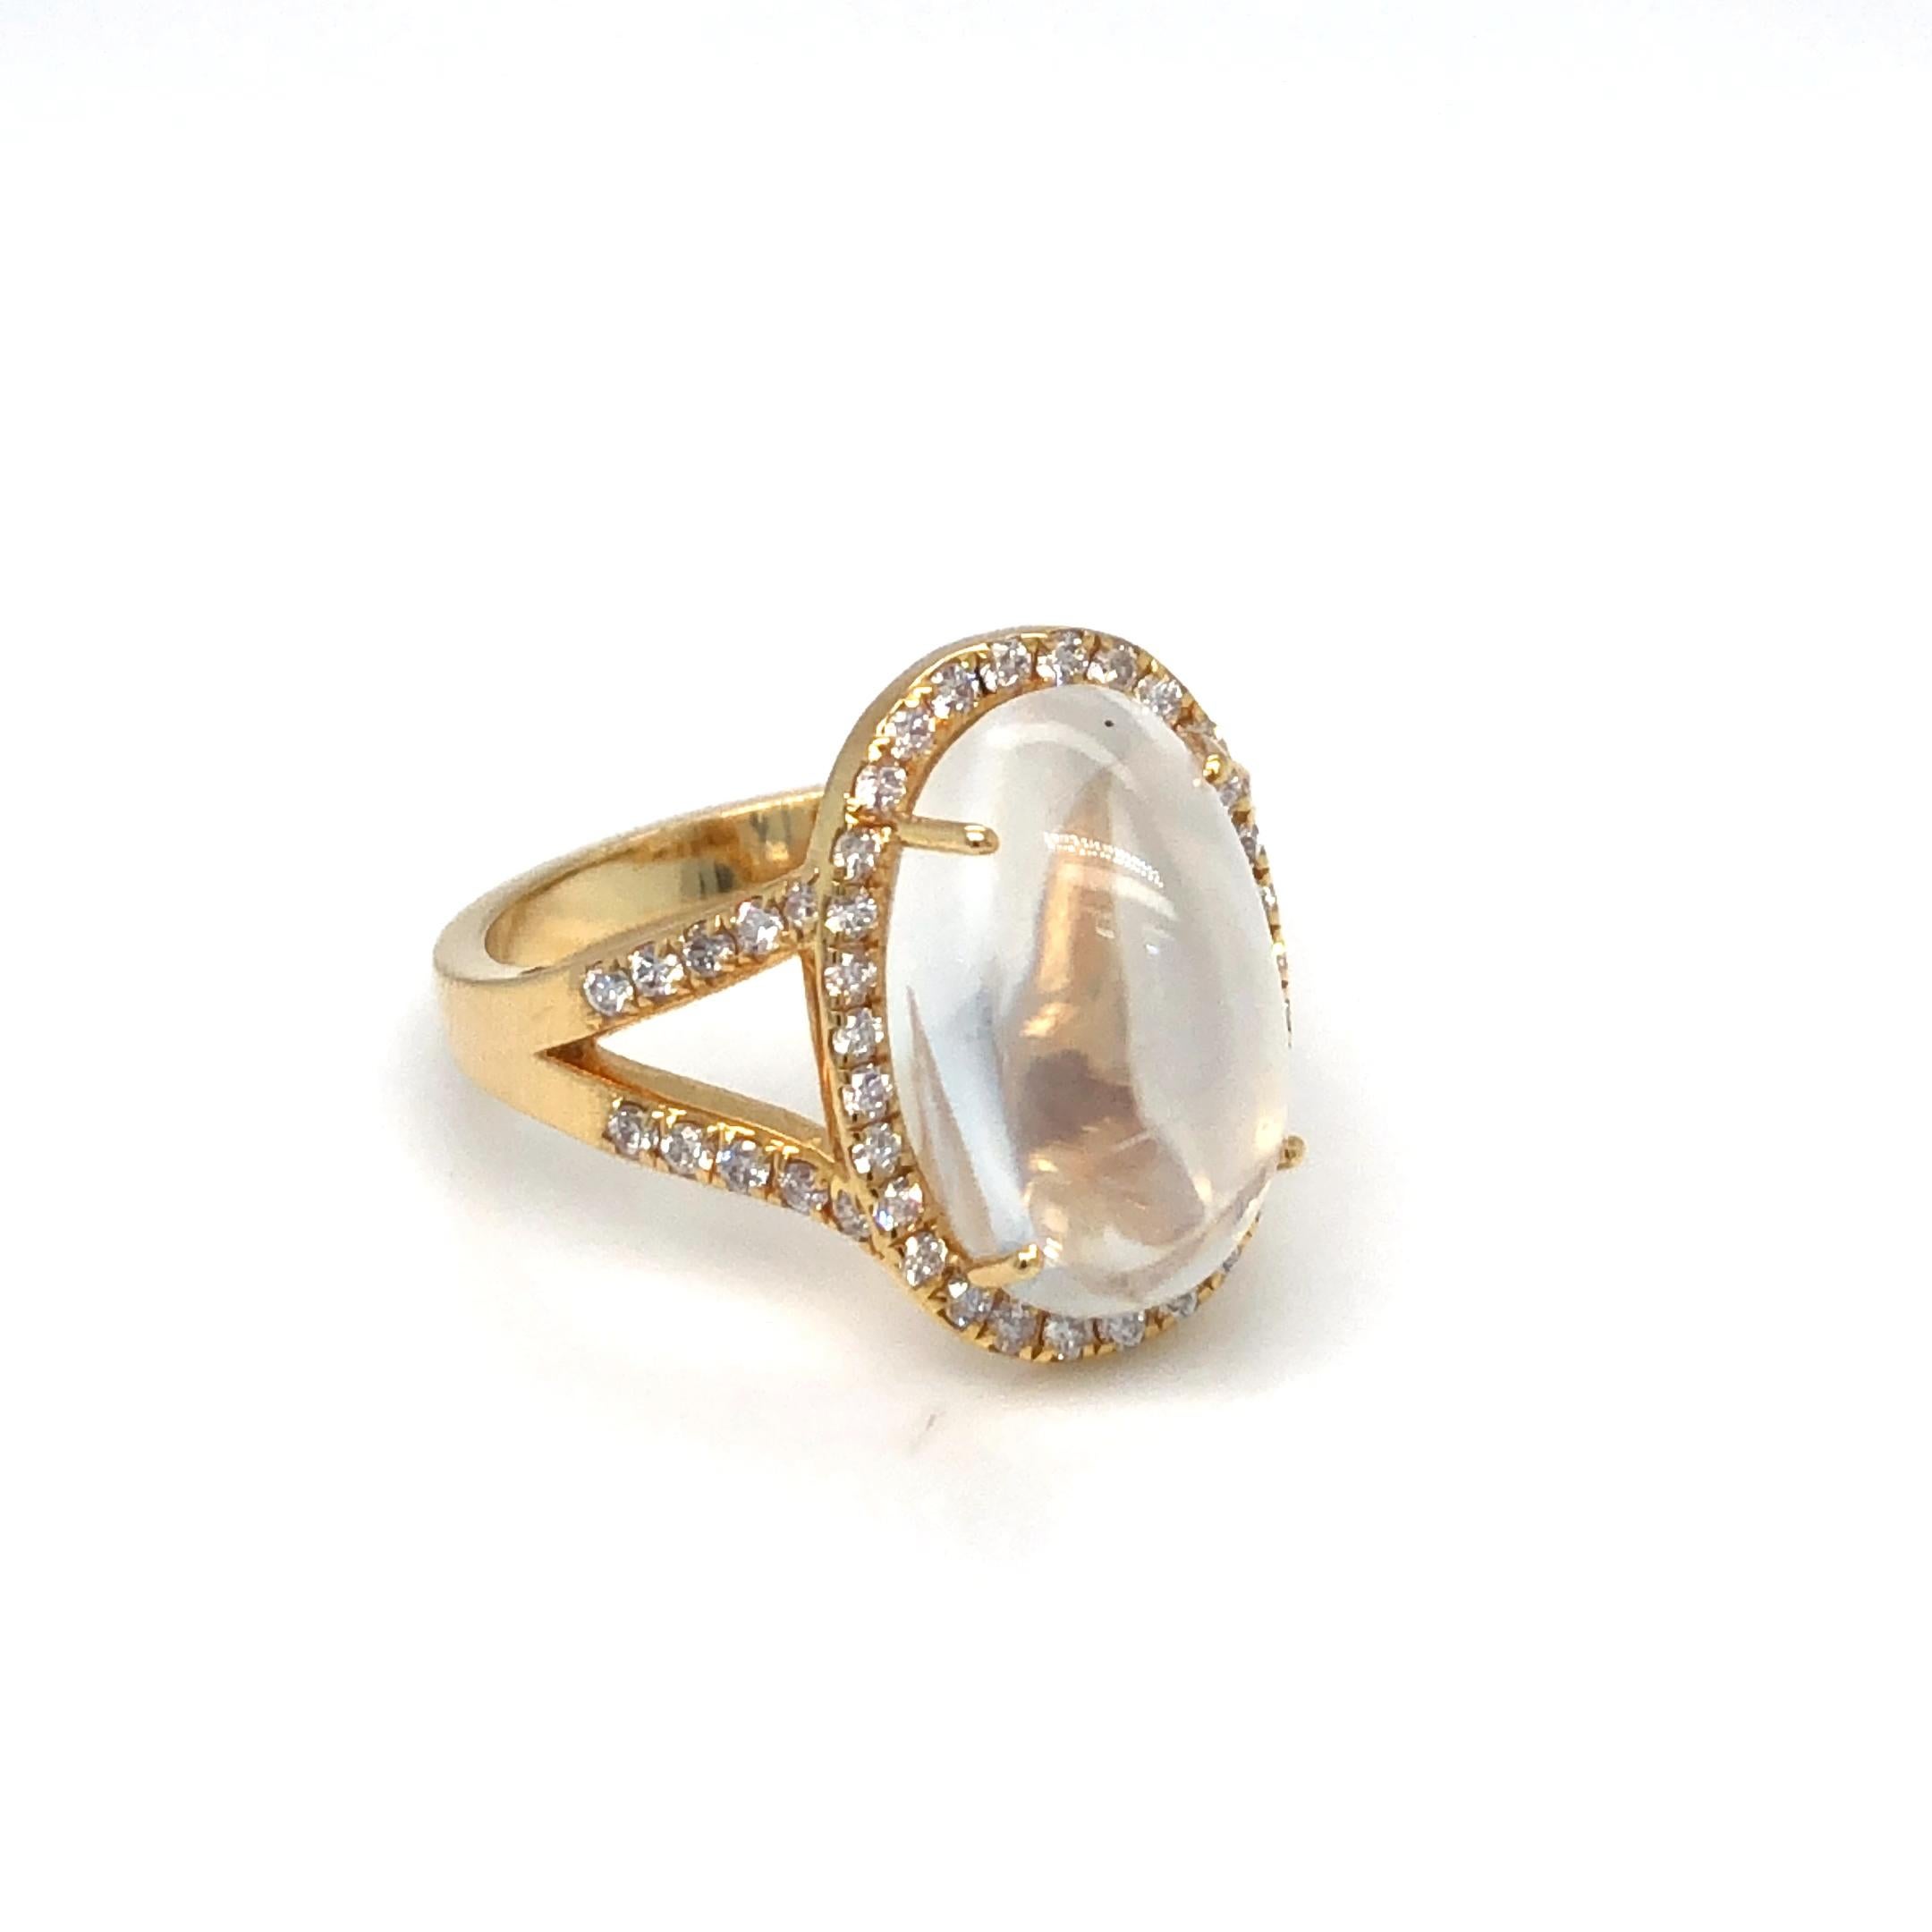 Moonstone 6.91ct and Diamond 0.41ctw Ring 18K Yellow Gold Size 6